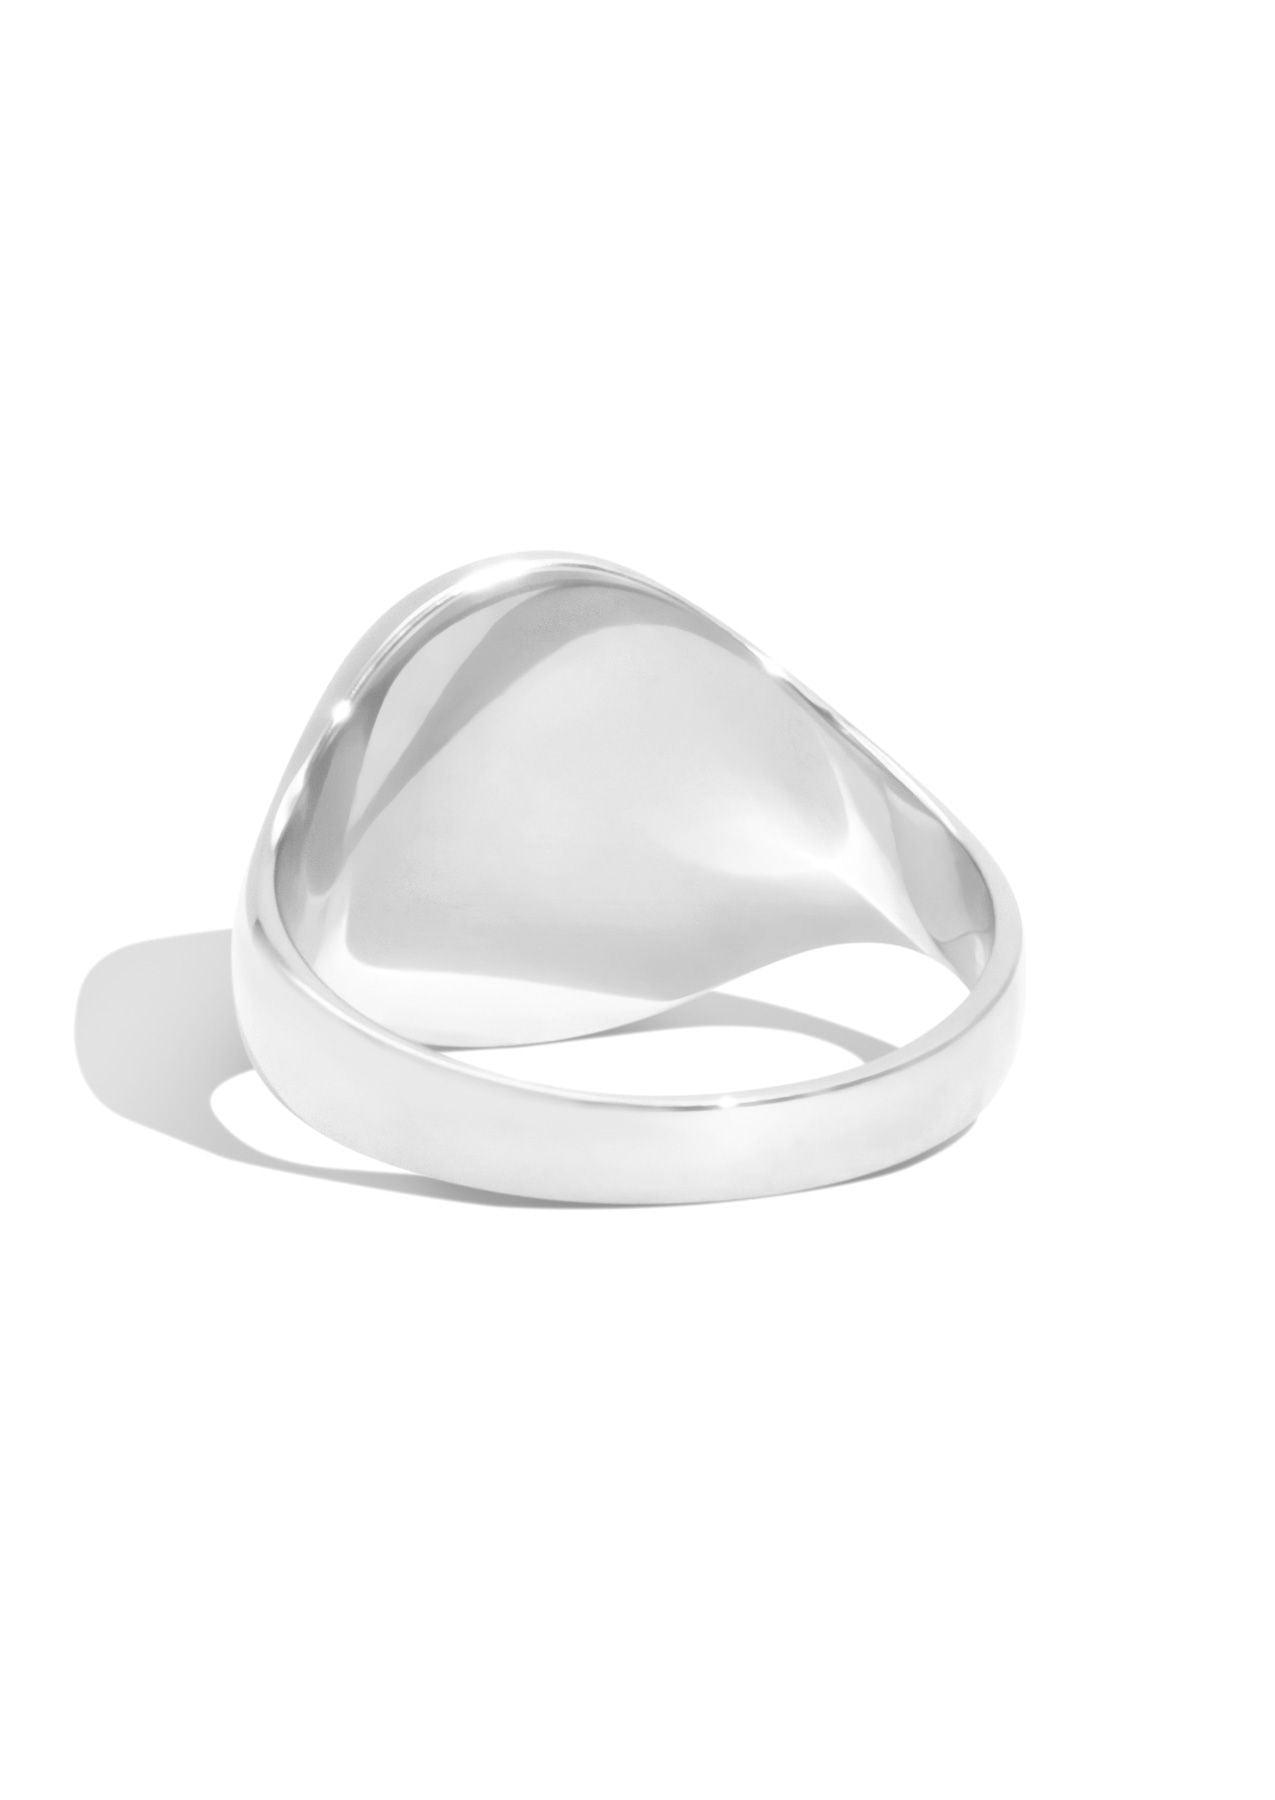 The Eclipse White Gold Signet Ring